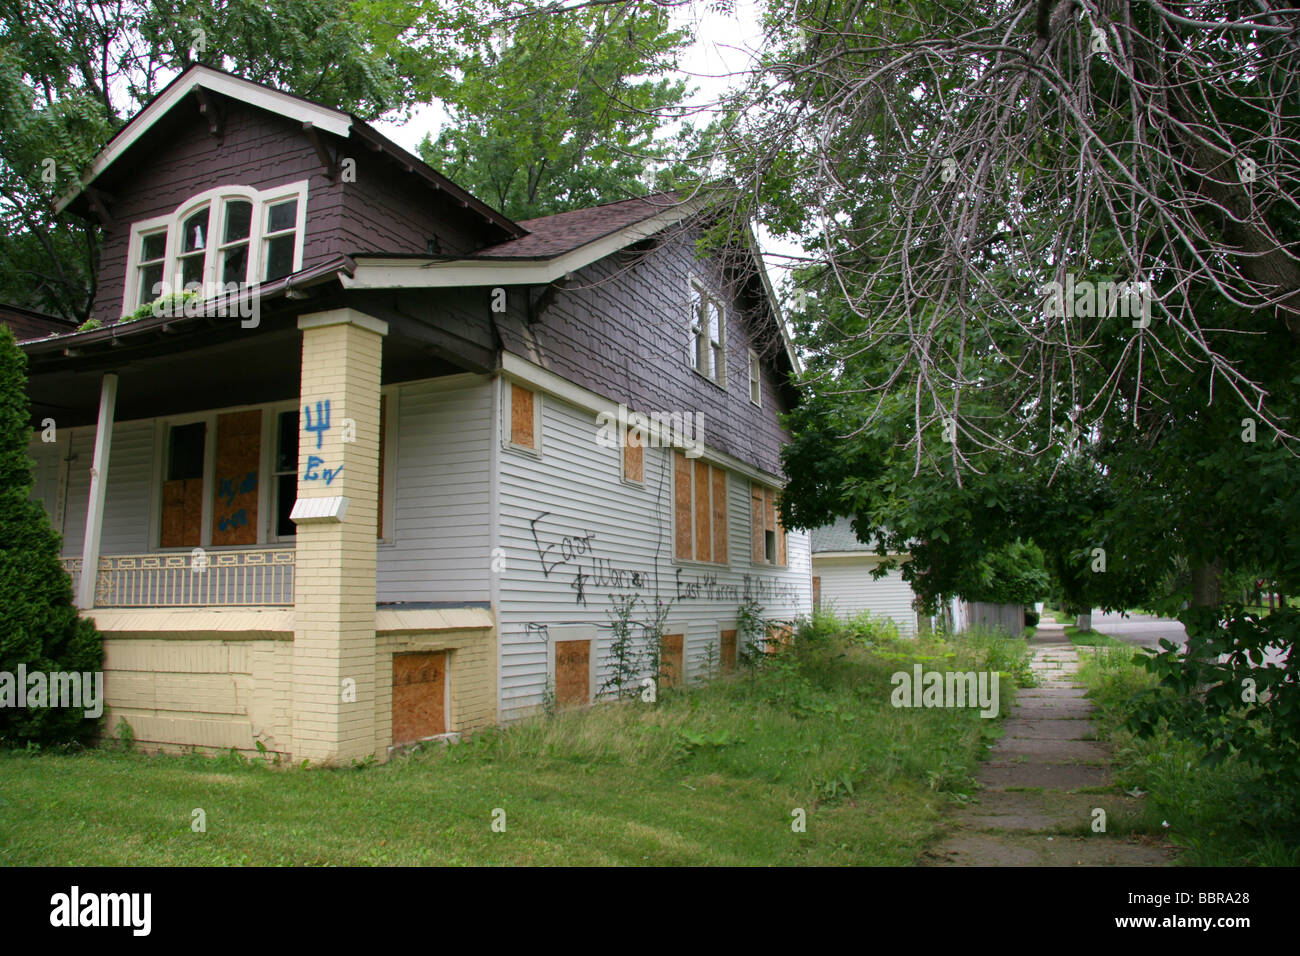 Boarded up house covered in gang markings and graffiti Detroit Michigan USA Stock Photo